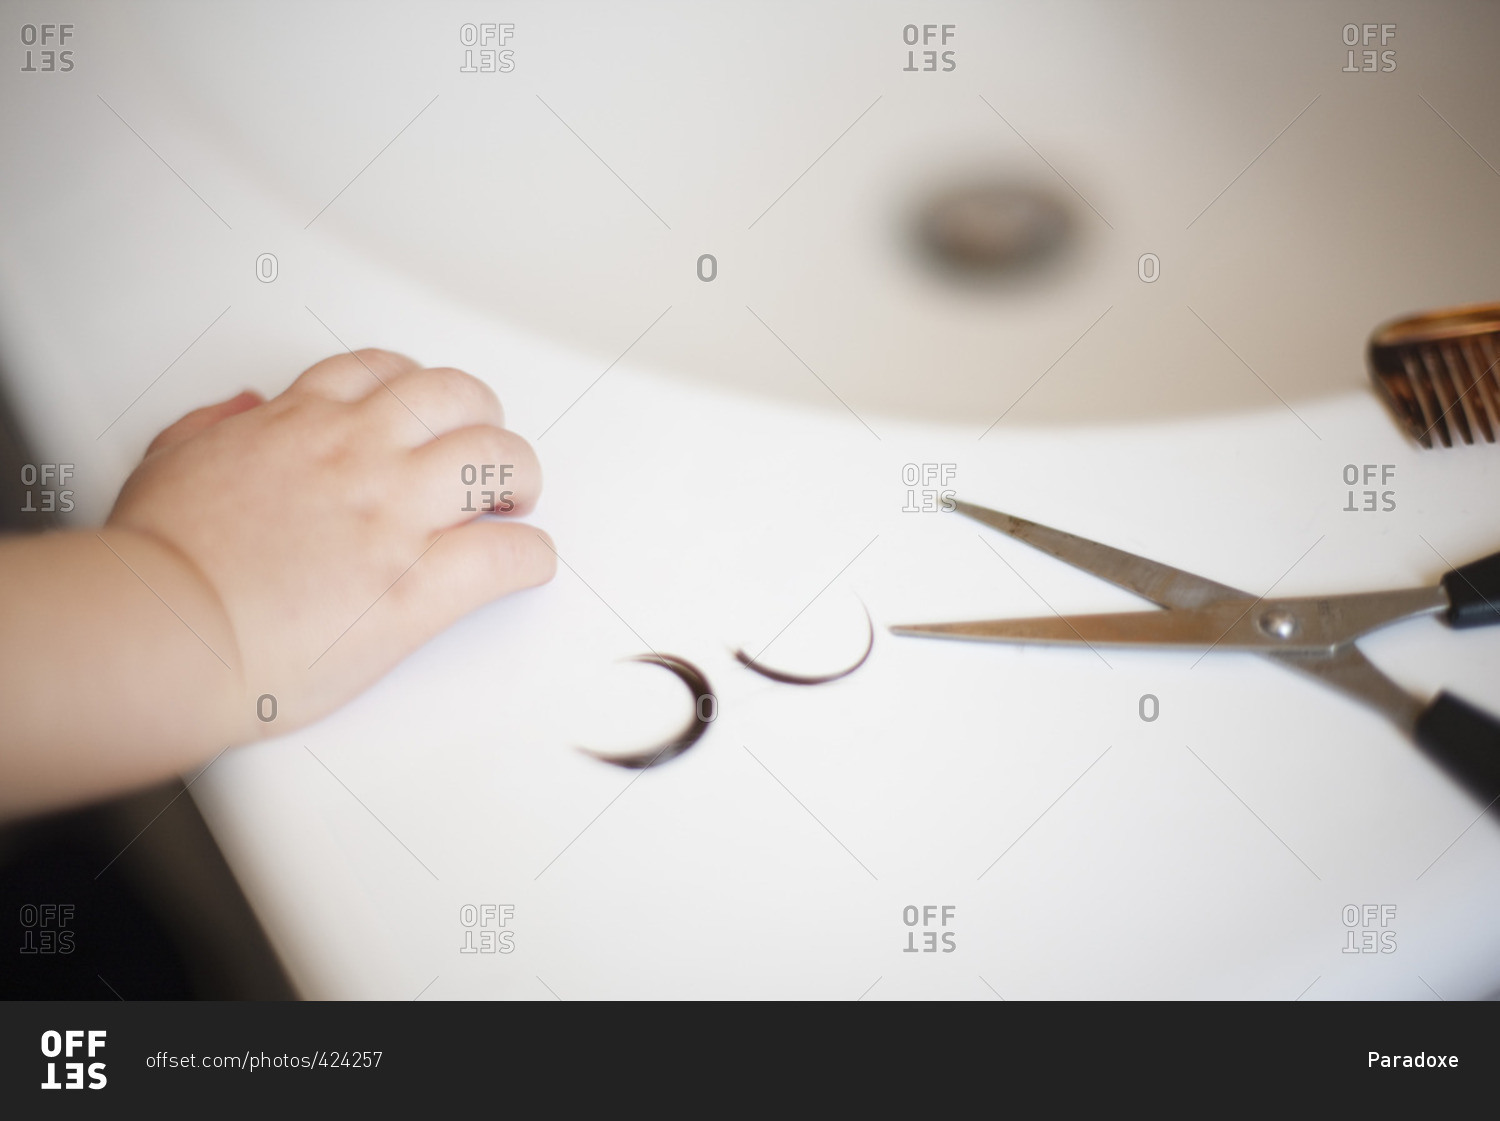 Child's hand resting on sink near scissors and locks of hair